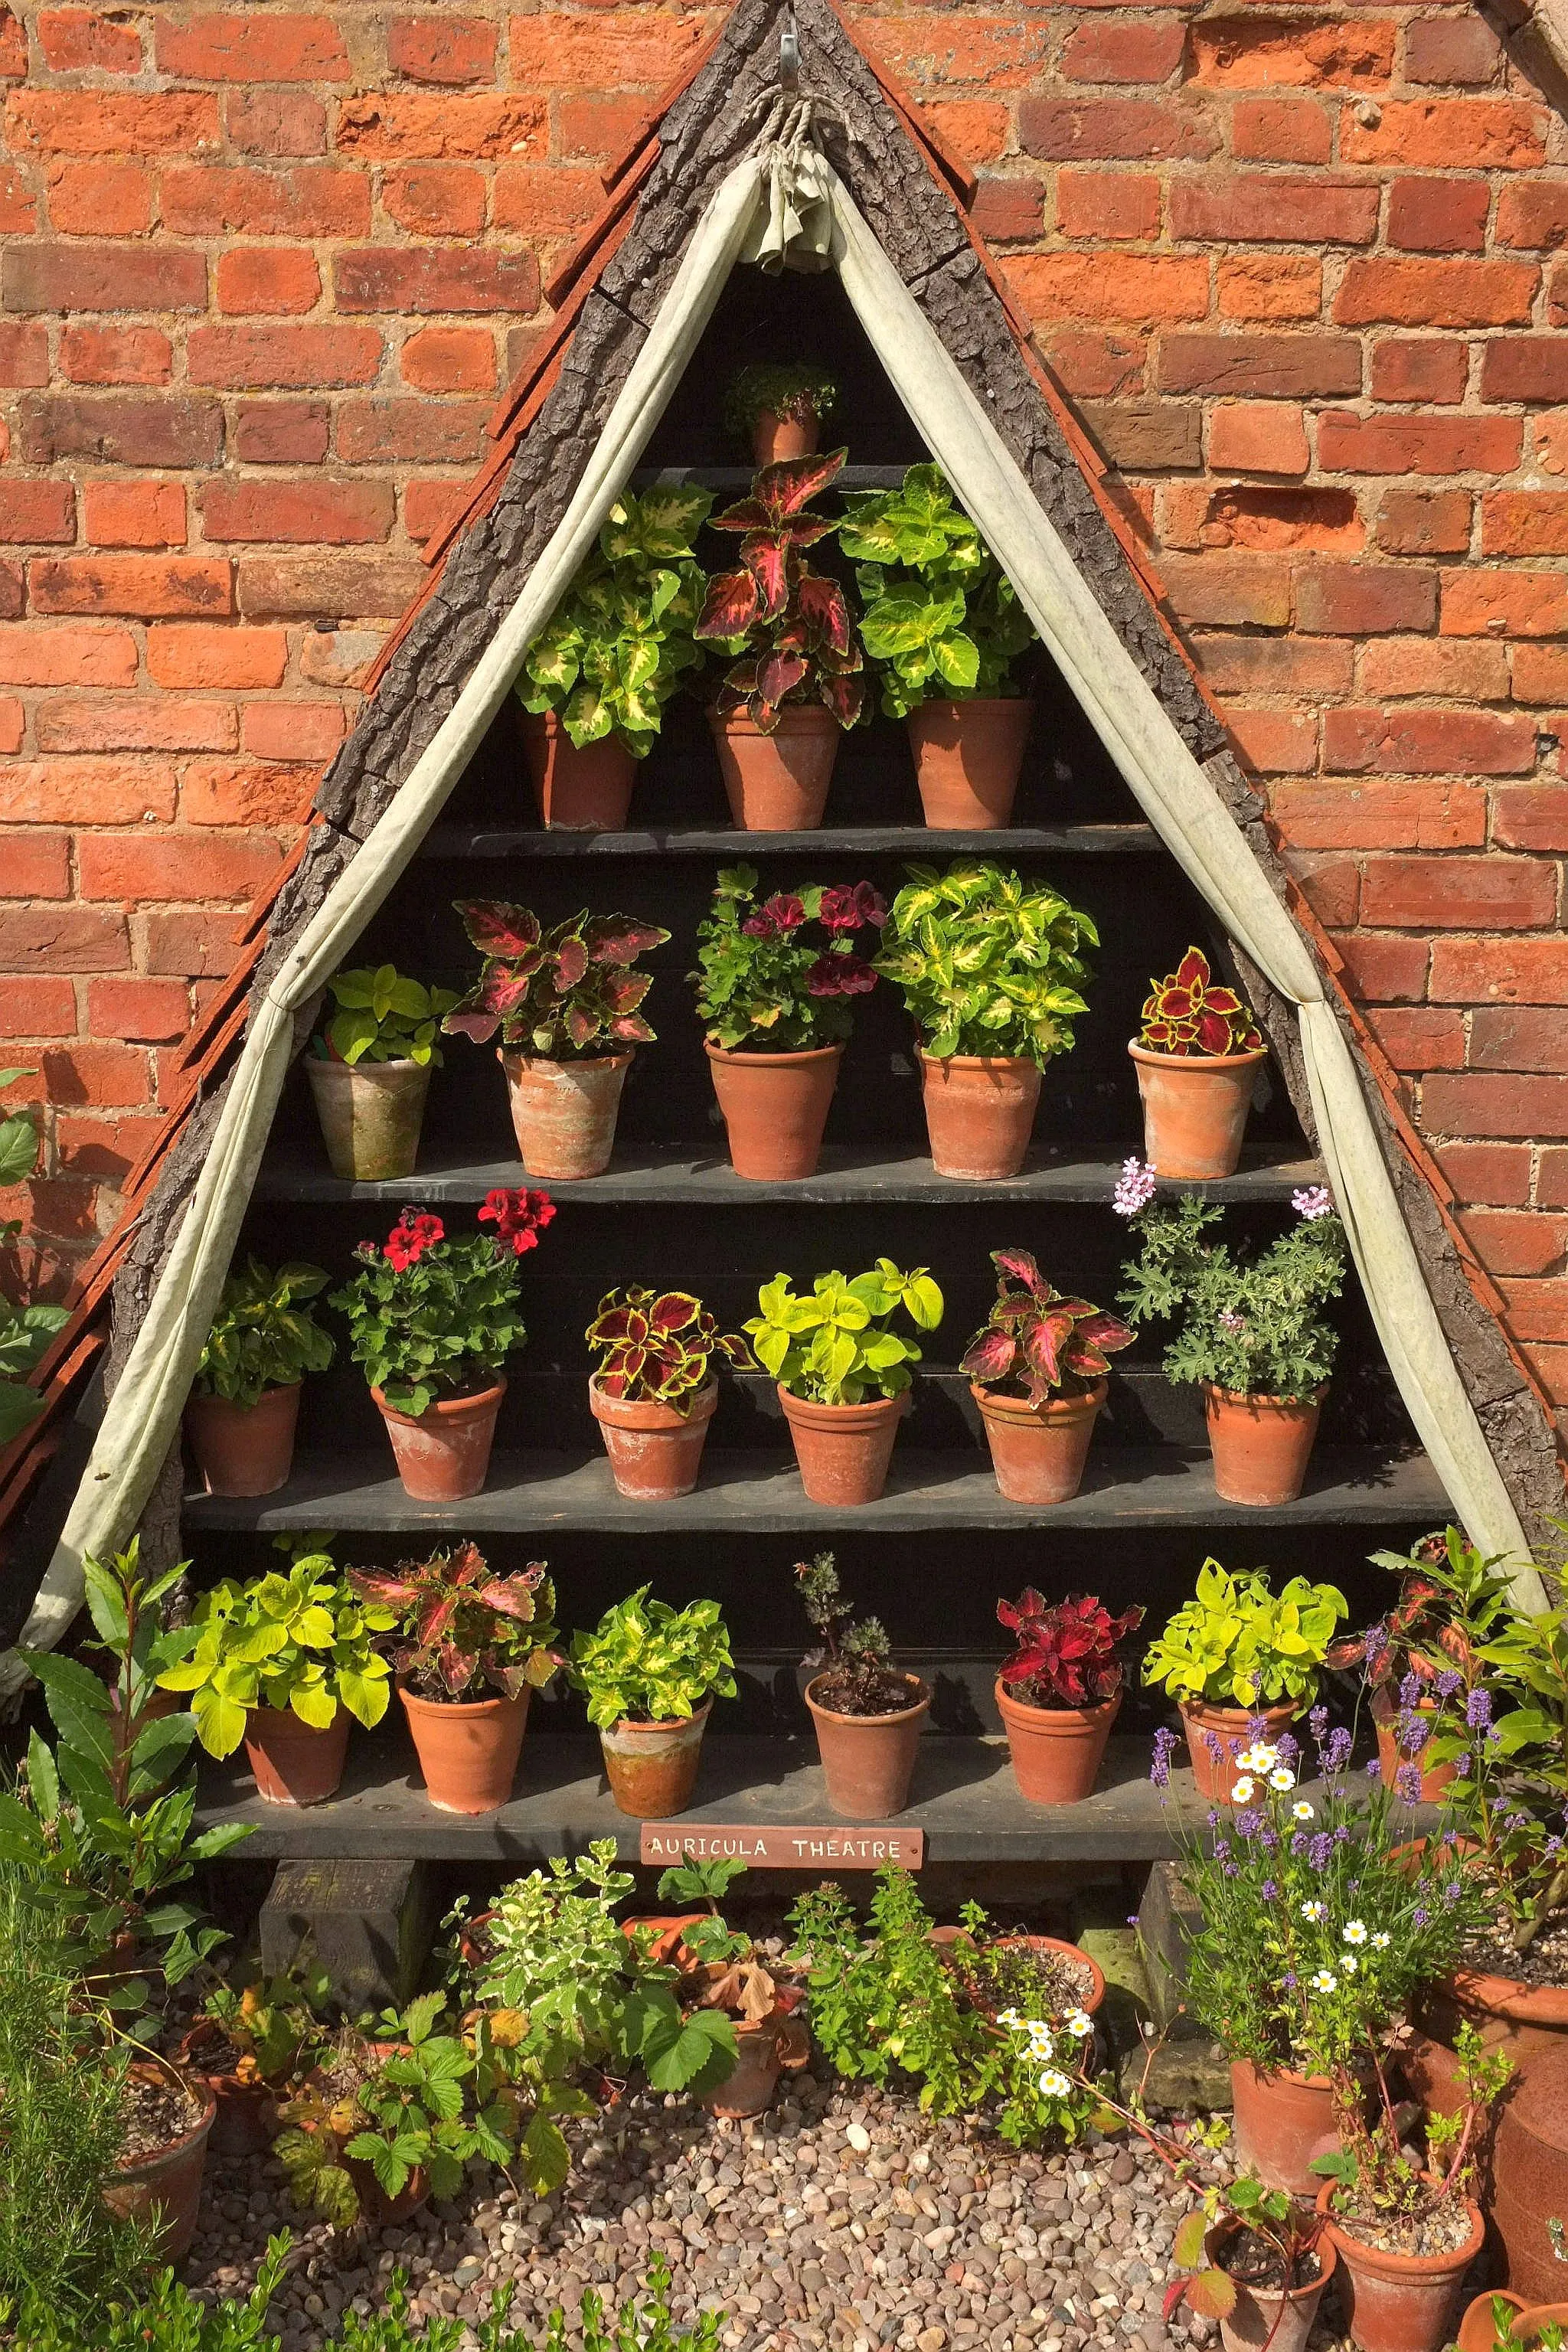 Photo showing: "Auricula theatre", kitchen garden, Packwood House